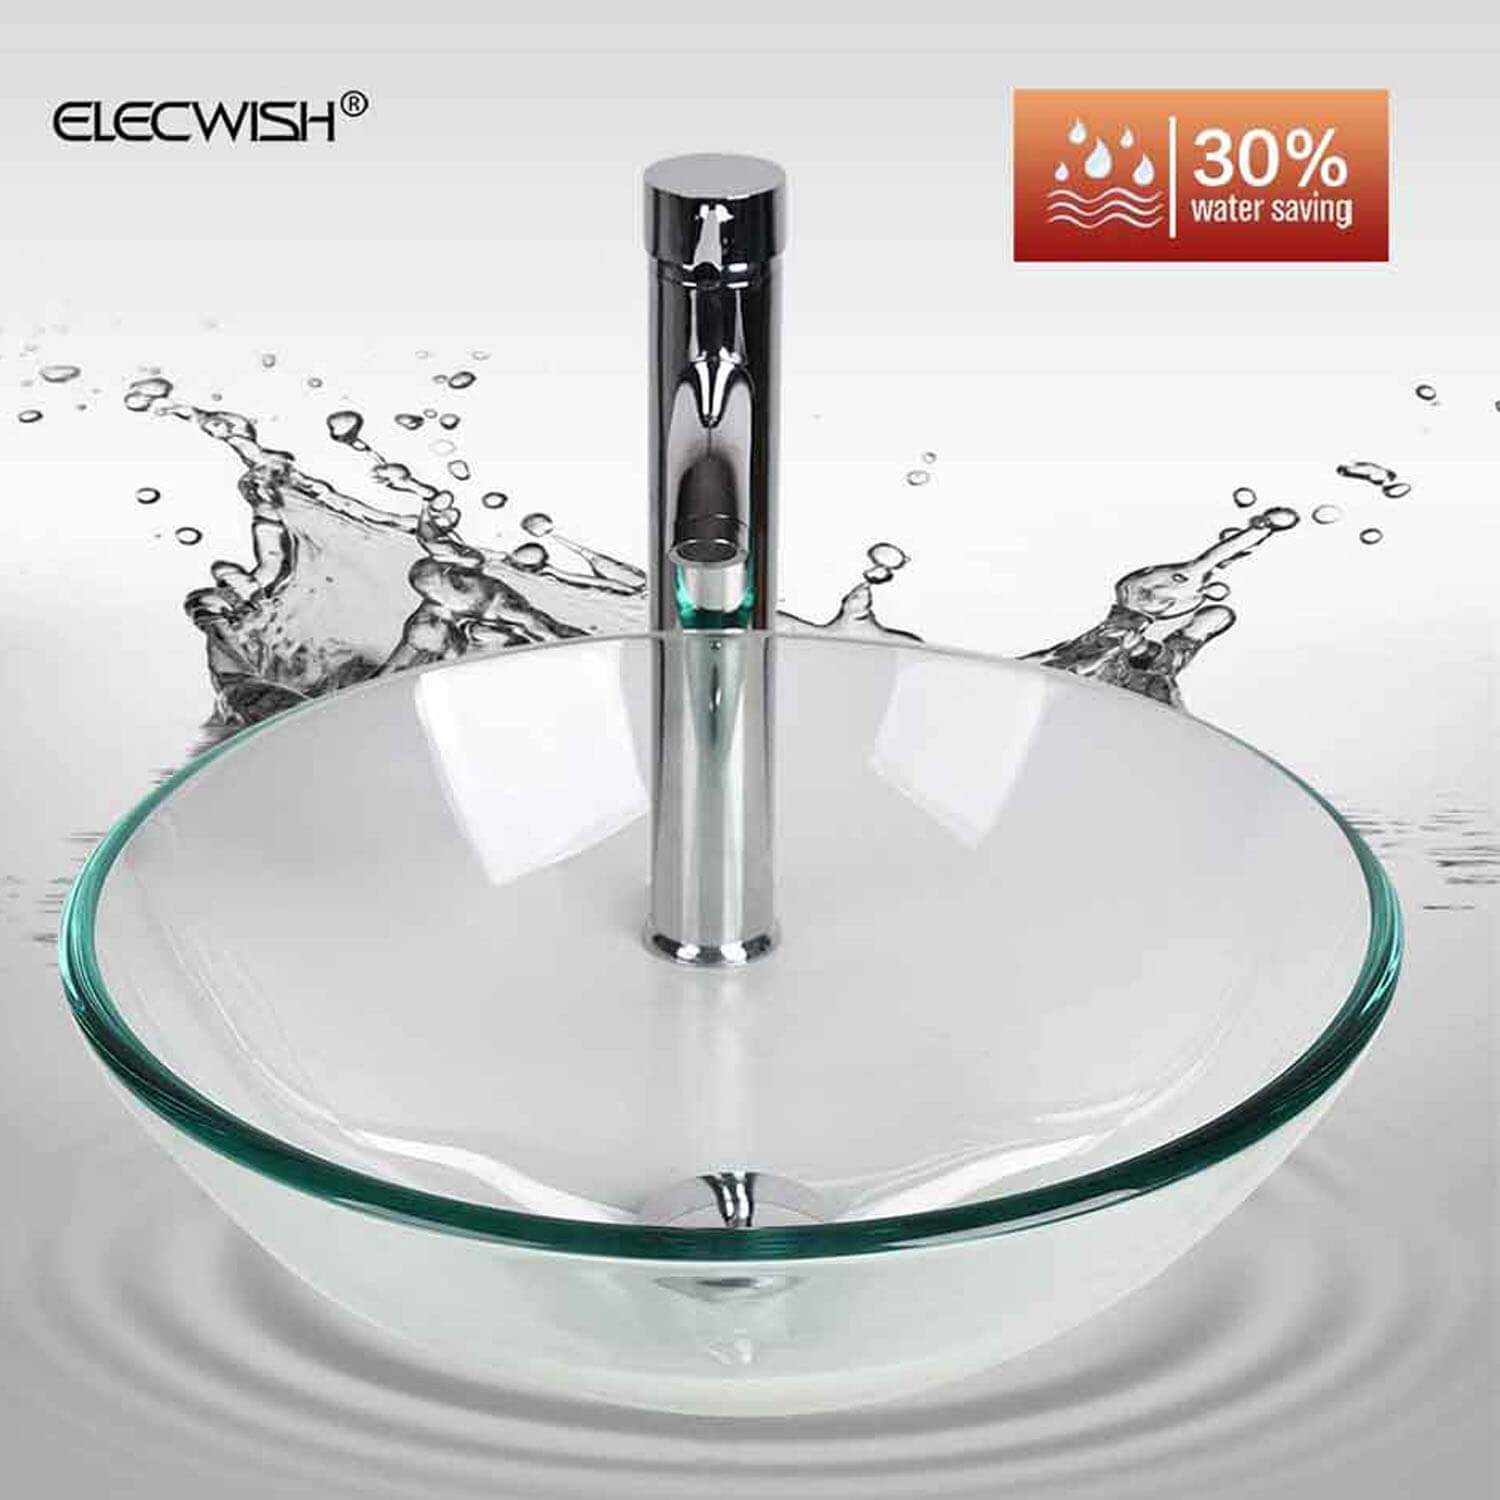 Elecwish Vessel Sinks Glass Vessel Sink with Faucet Combo is water saving